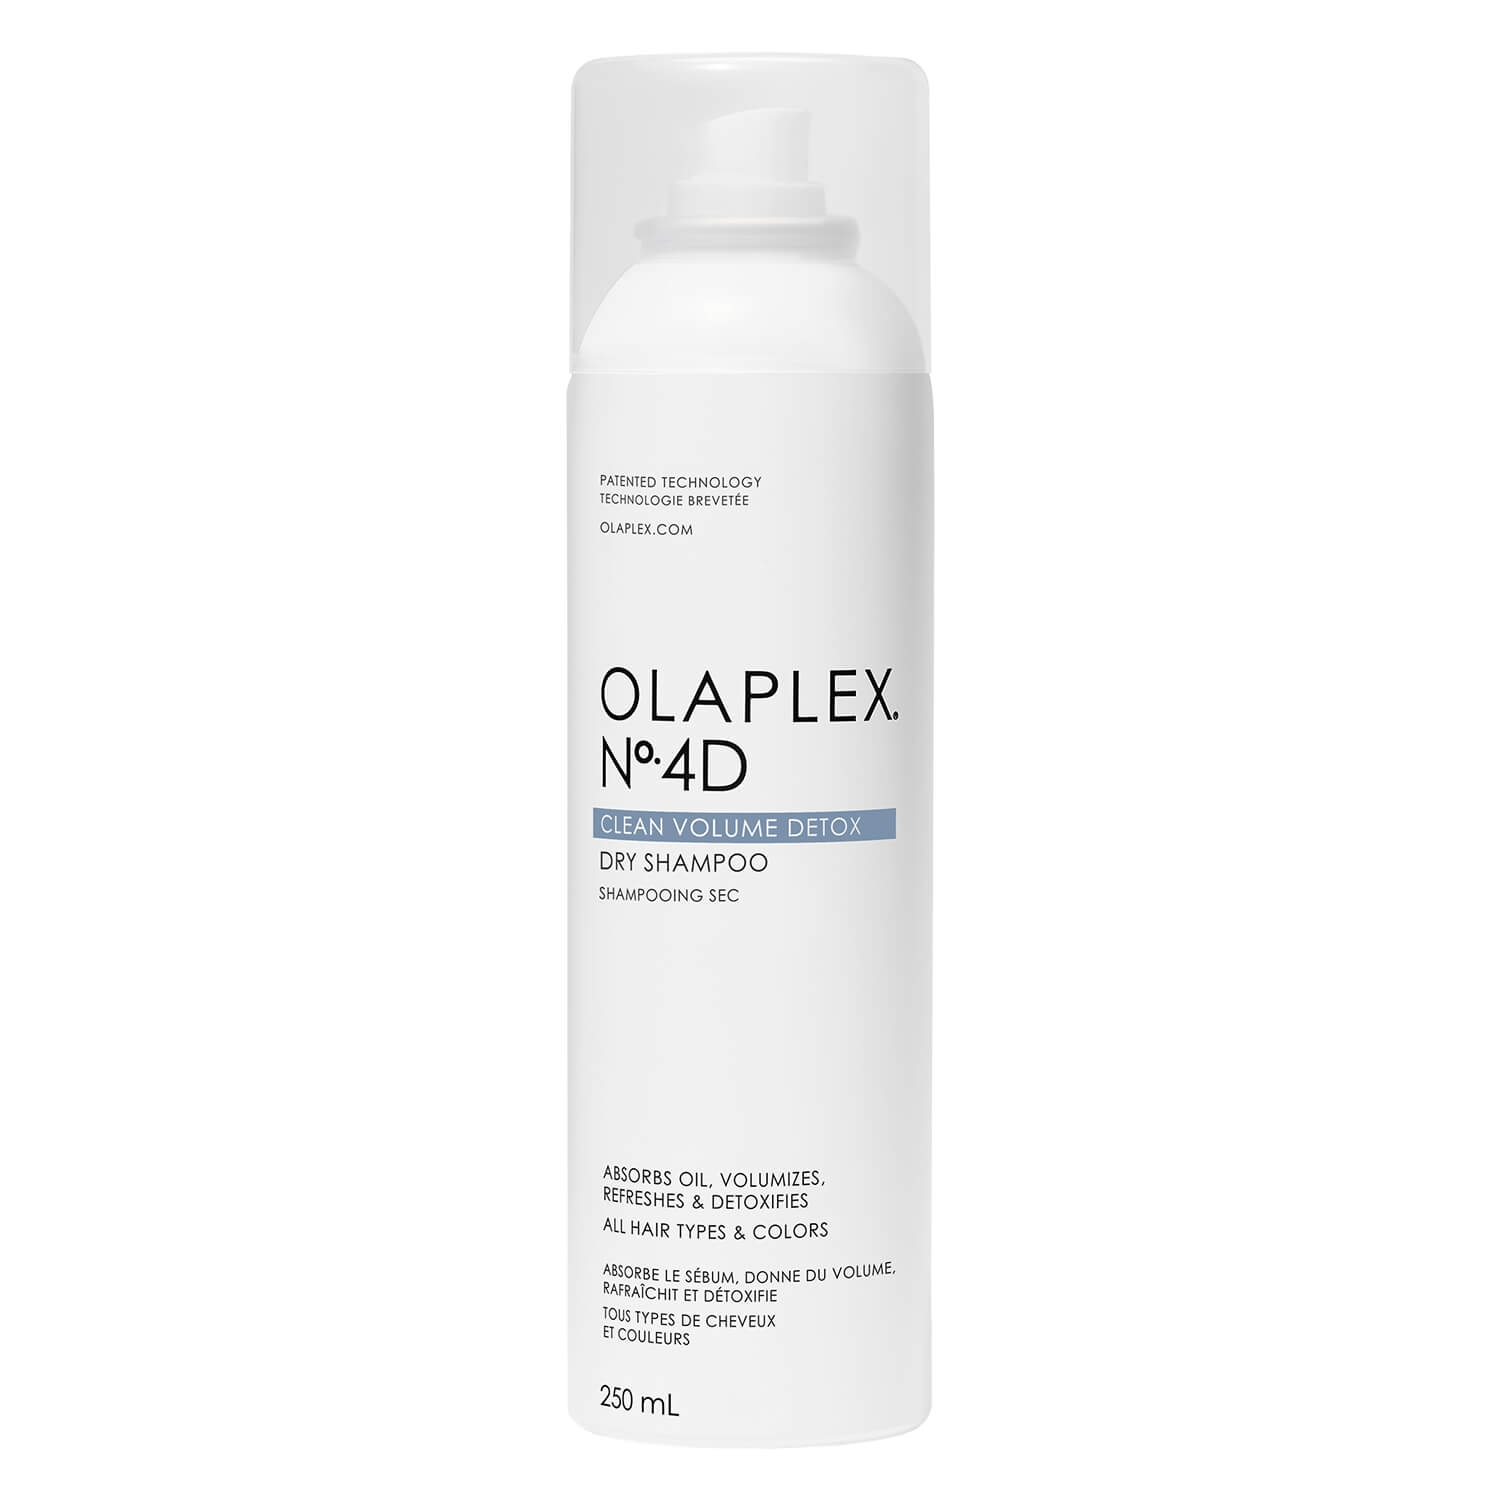 Product image from Olaplex - Clean Volume Detox Dry Shampoo No. 4D